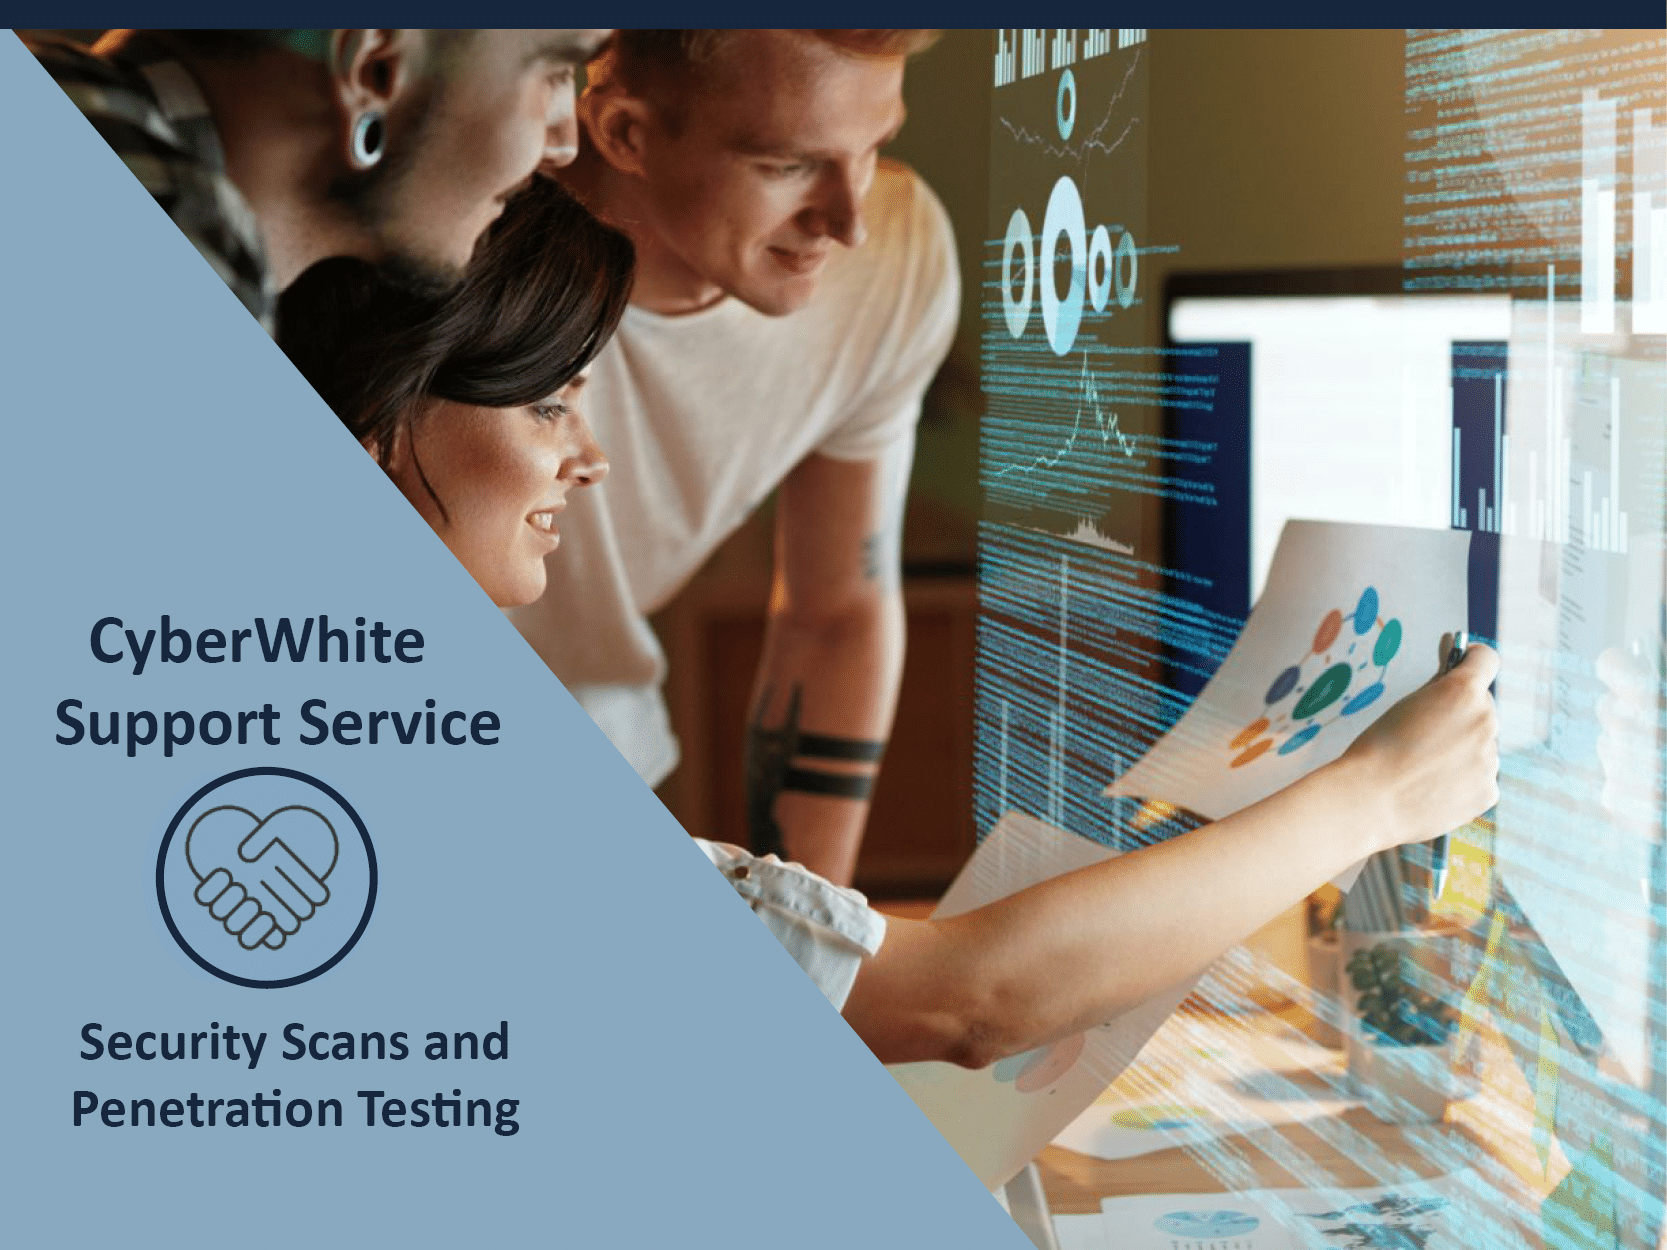 Security Scans & Penetration Testing